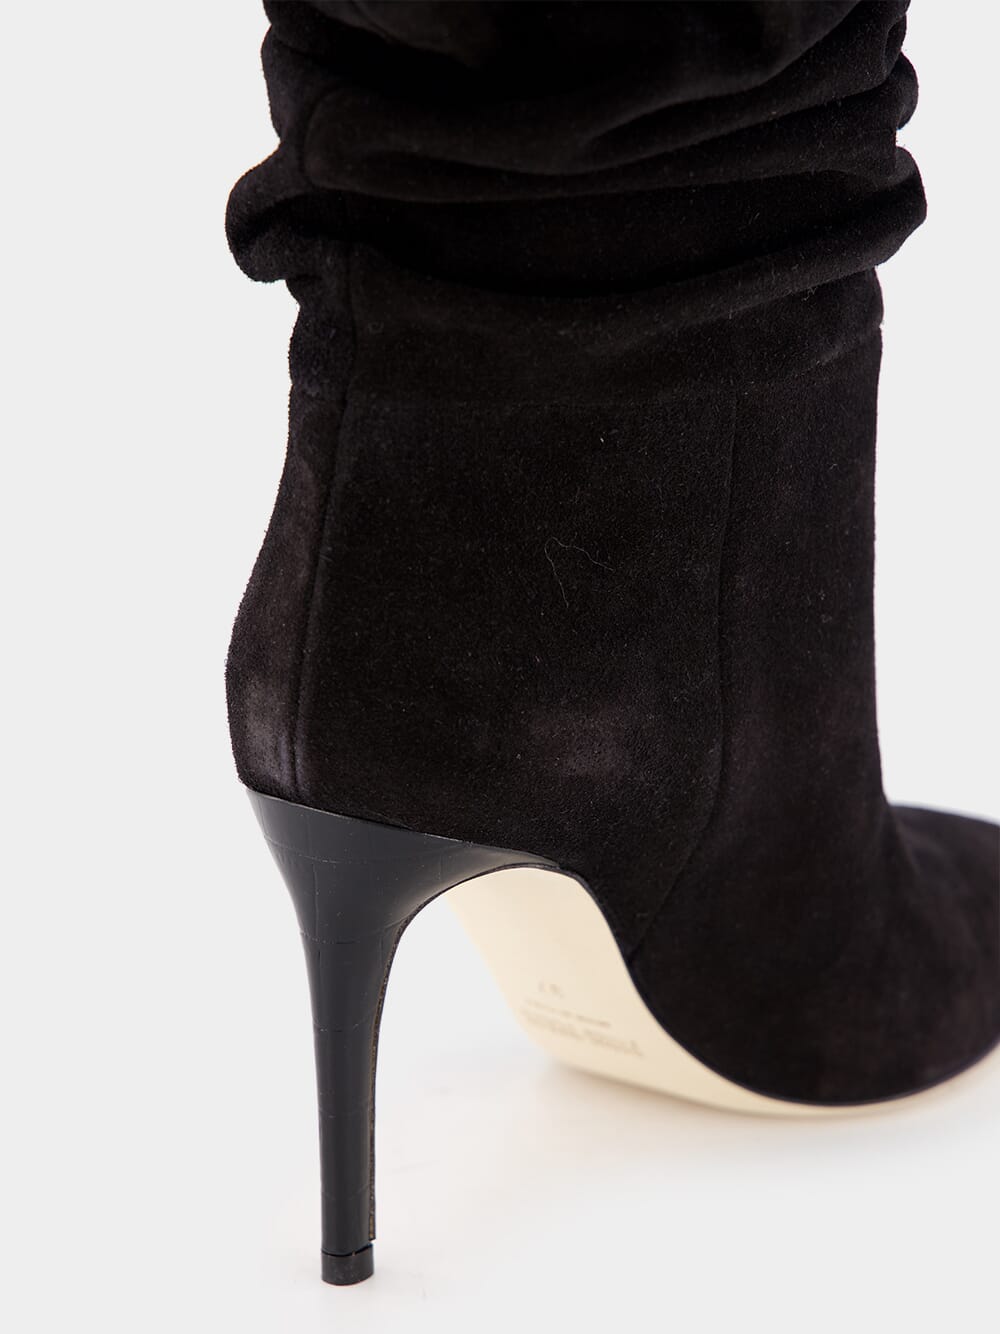 Paris TexasSlouchy Suede 85mm Ankle Boots at Fashion Clinic